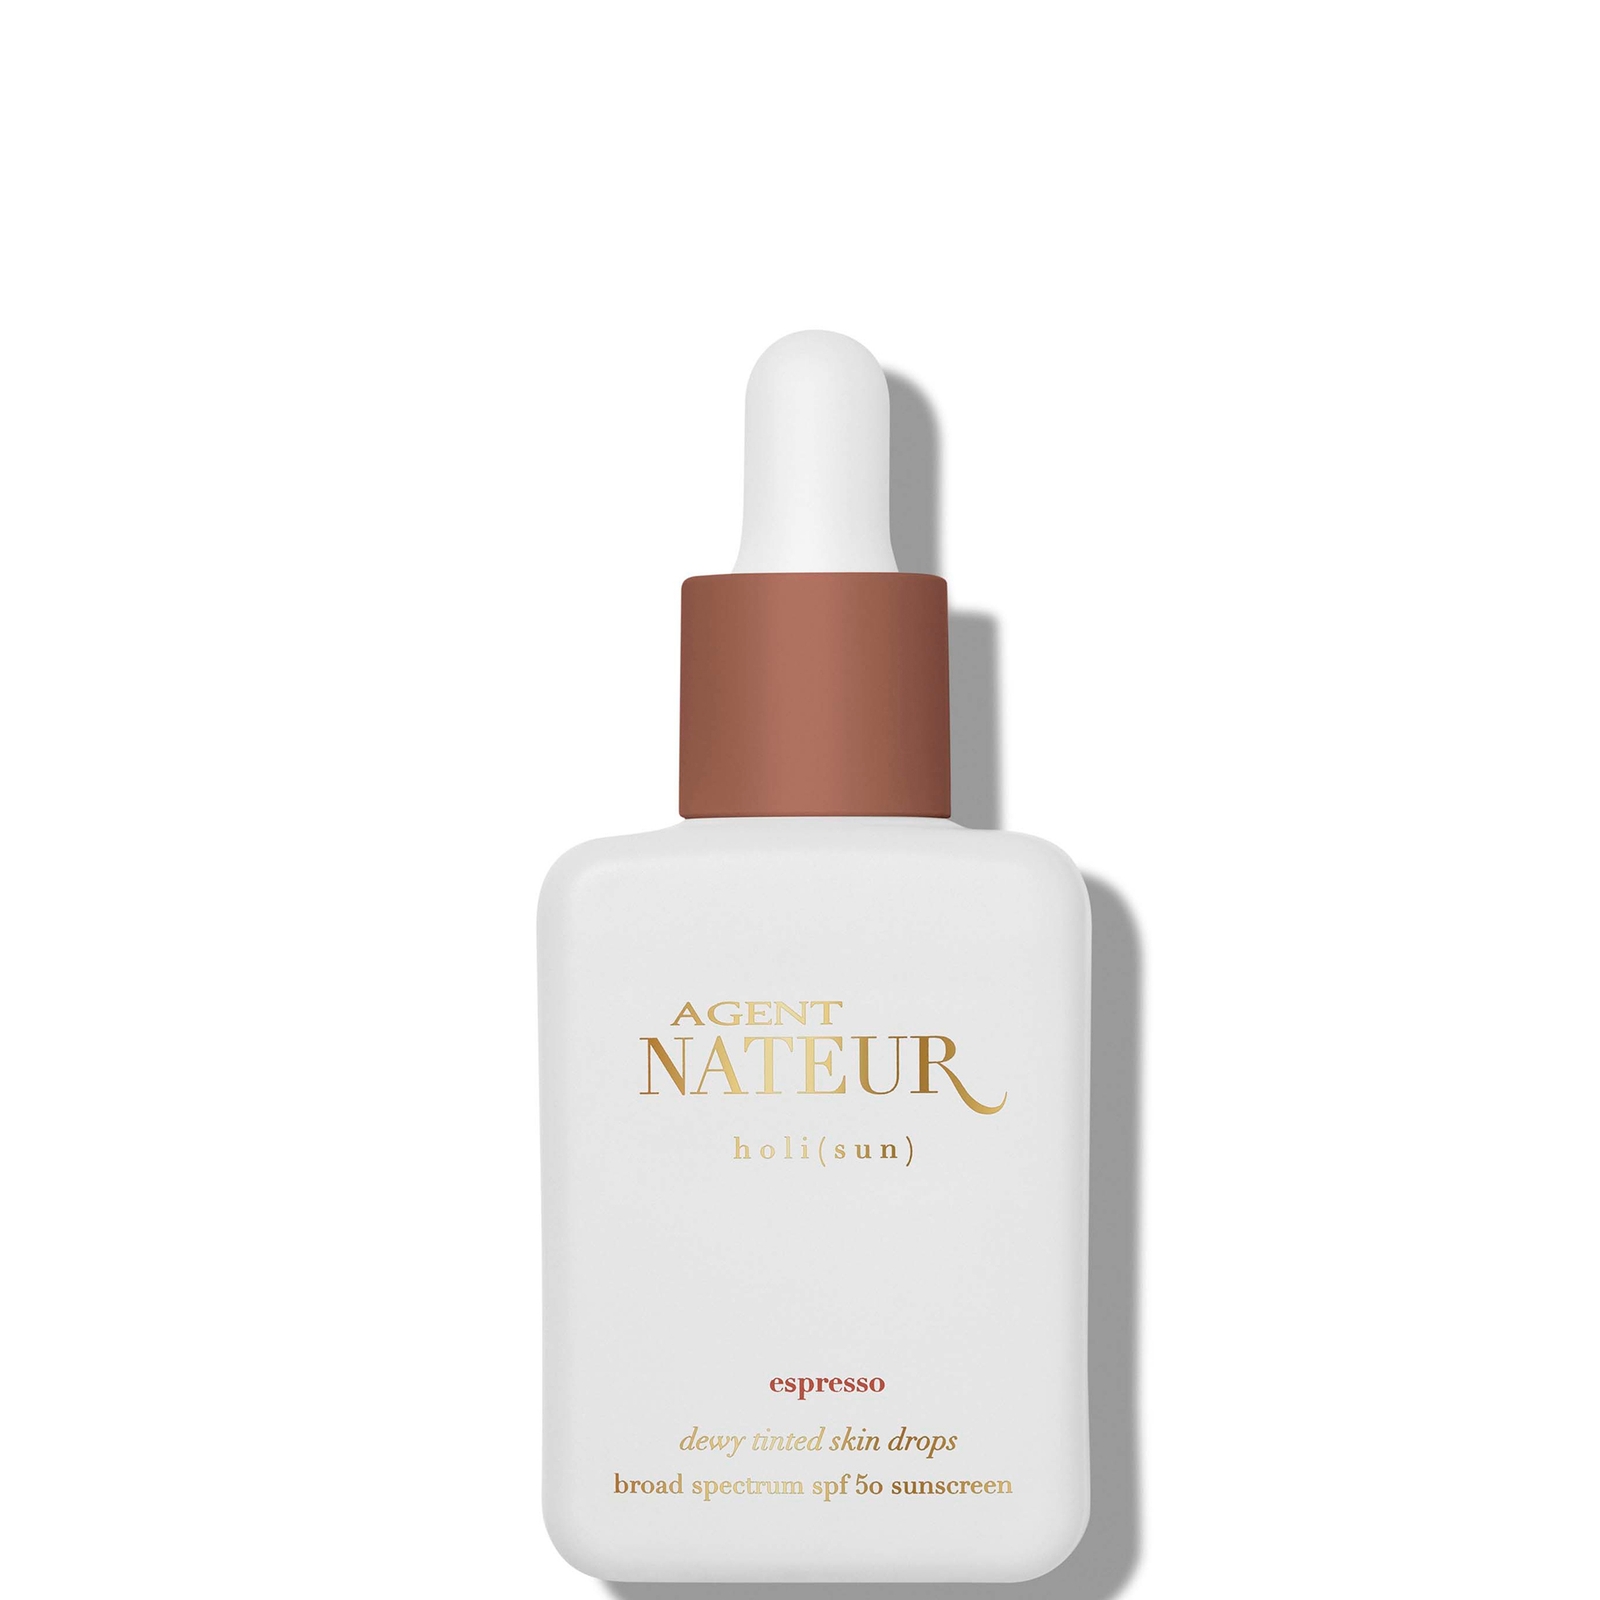 Shop Agent Nateur Holi (sun) Spf 50 Dewy Tinted Skin Drops 30ml (various Shades) In Espresso